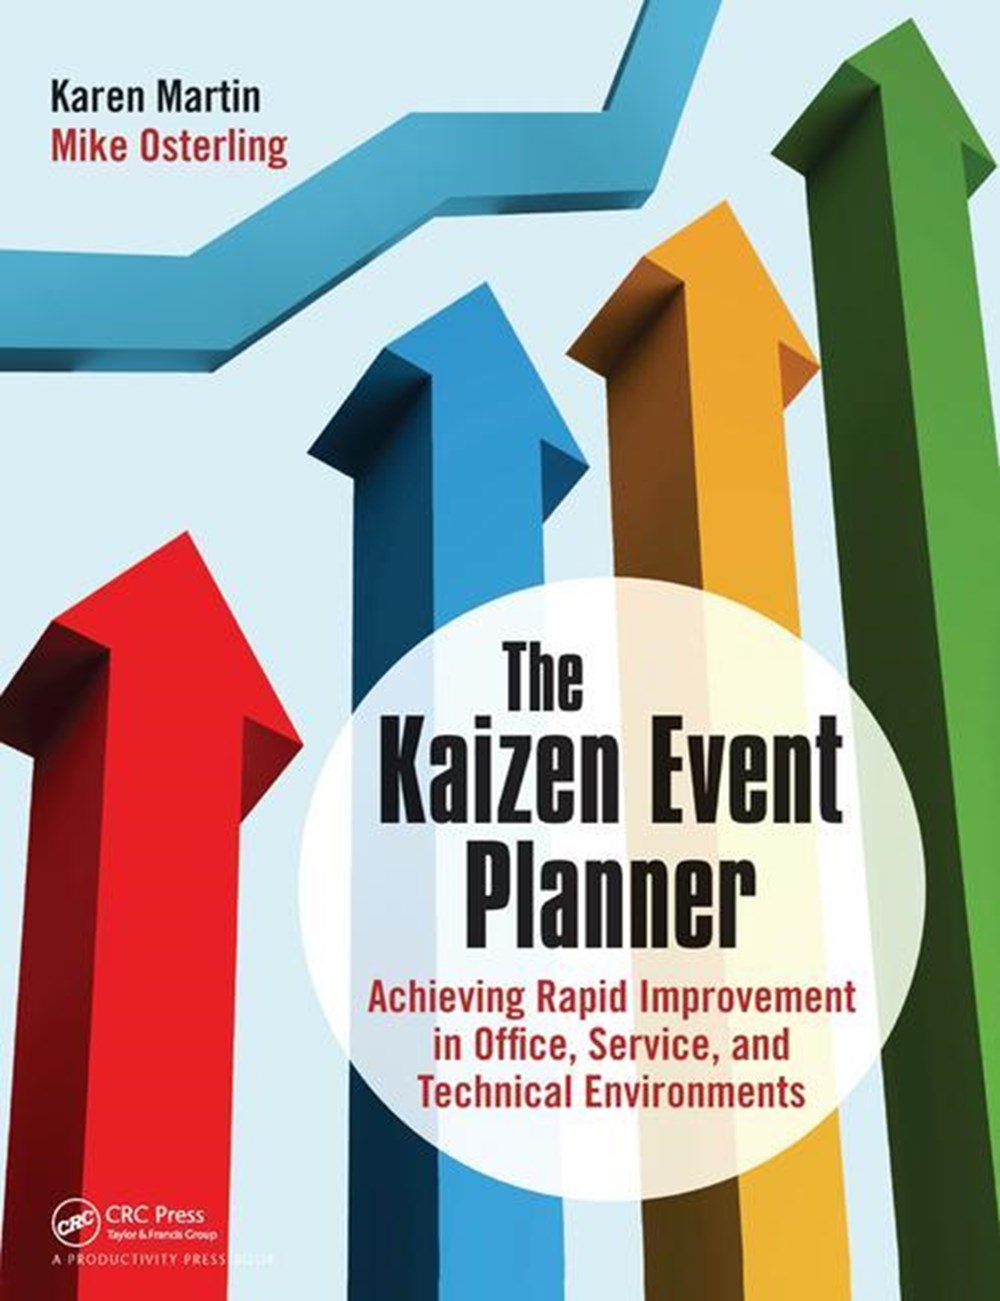 Kaizen Event Planner Achieving Rapid Improvement in Office, Service, and Technical Environments